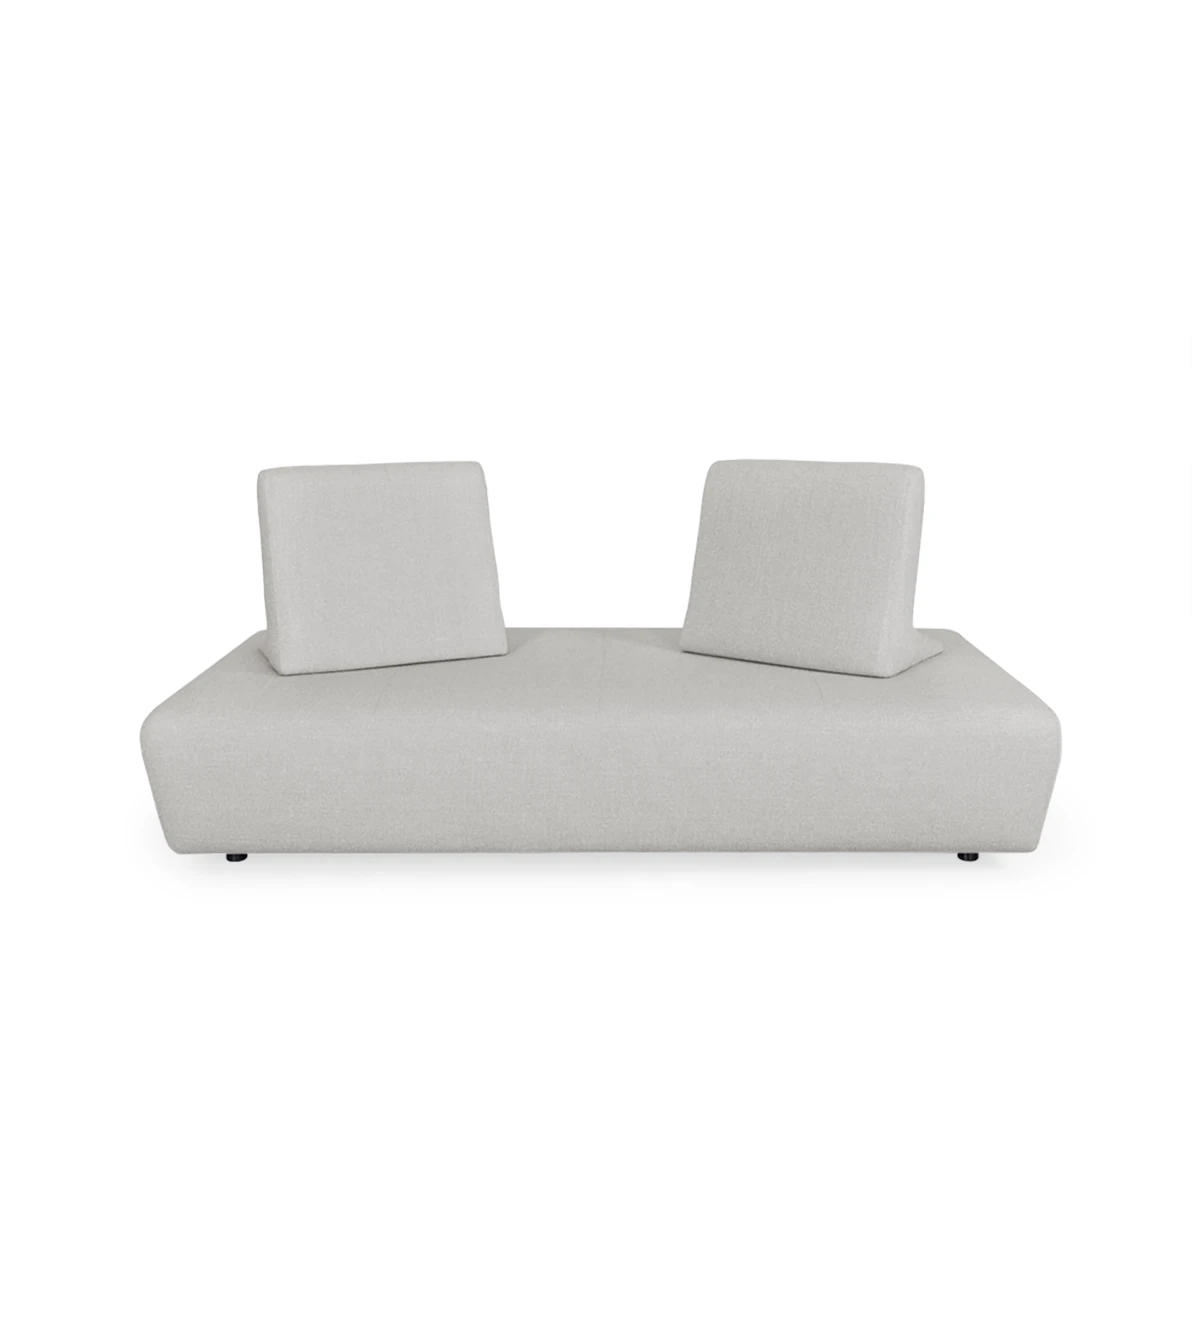 Sofa bed, upholstered in fabric, with removable back cushions.